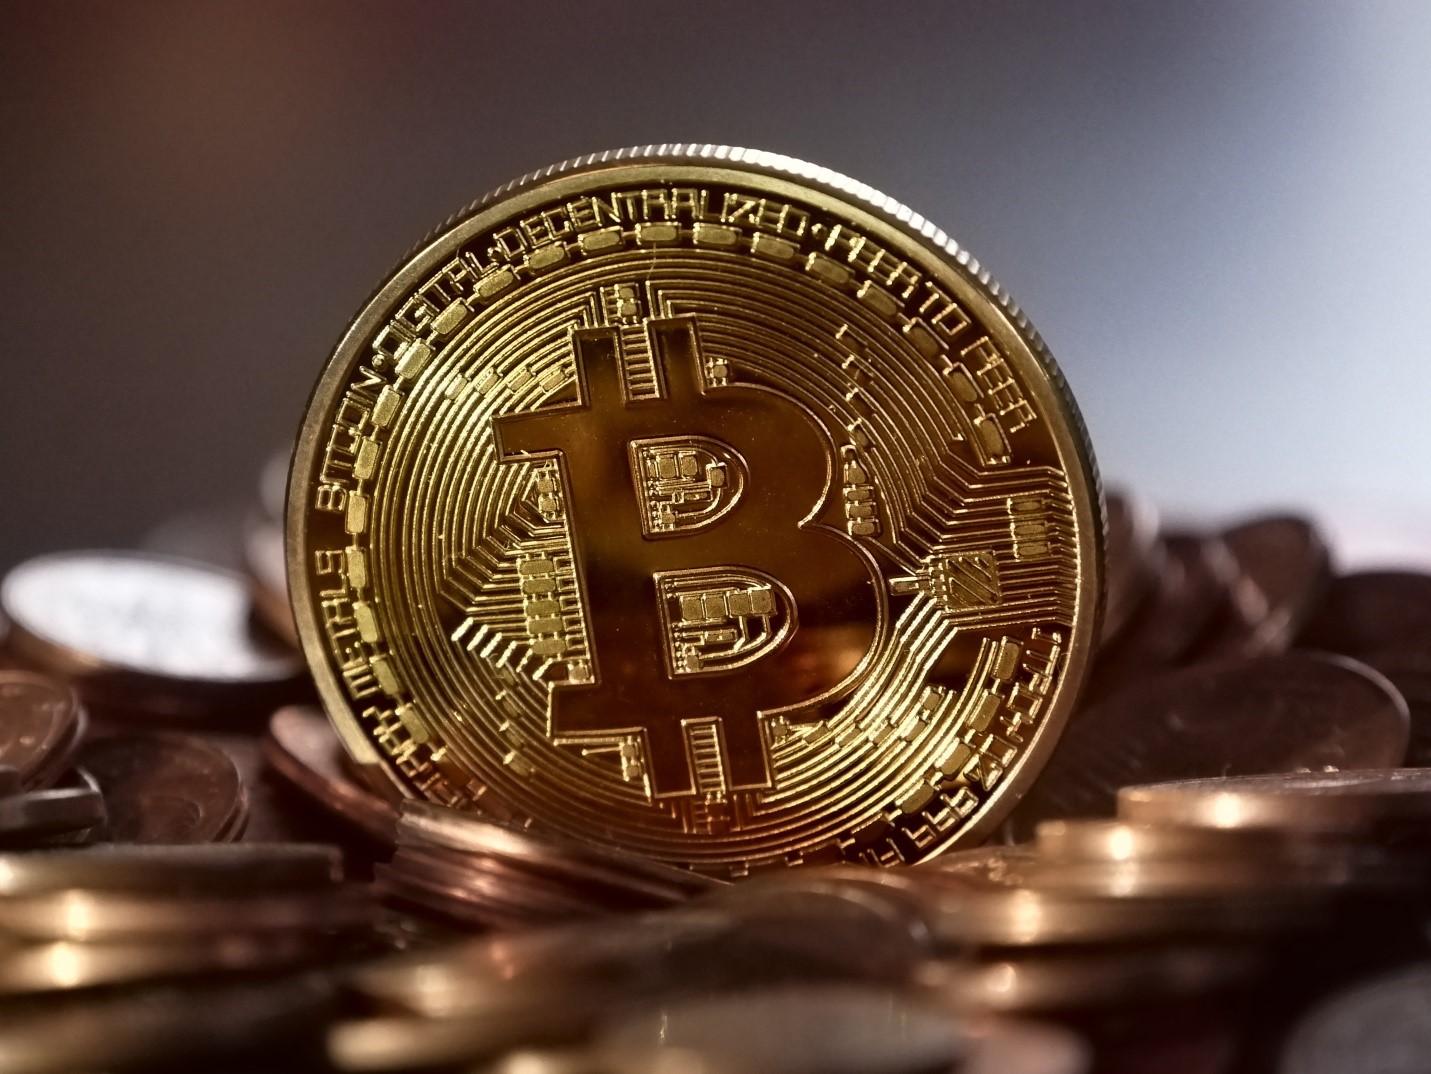 9 Interesting Facts About Bitcoin That Will Surprise You